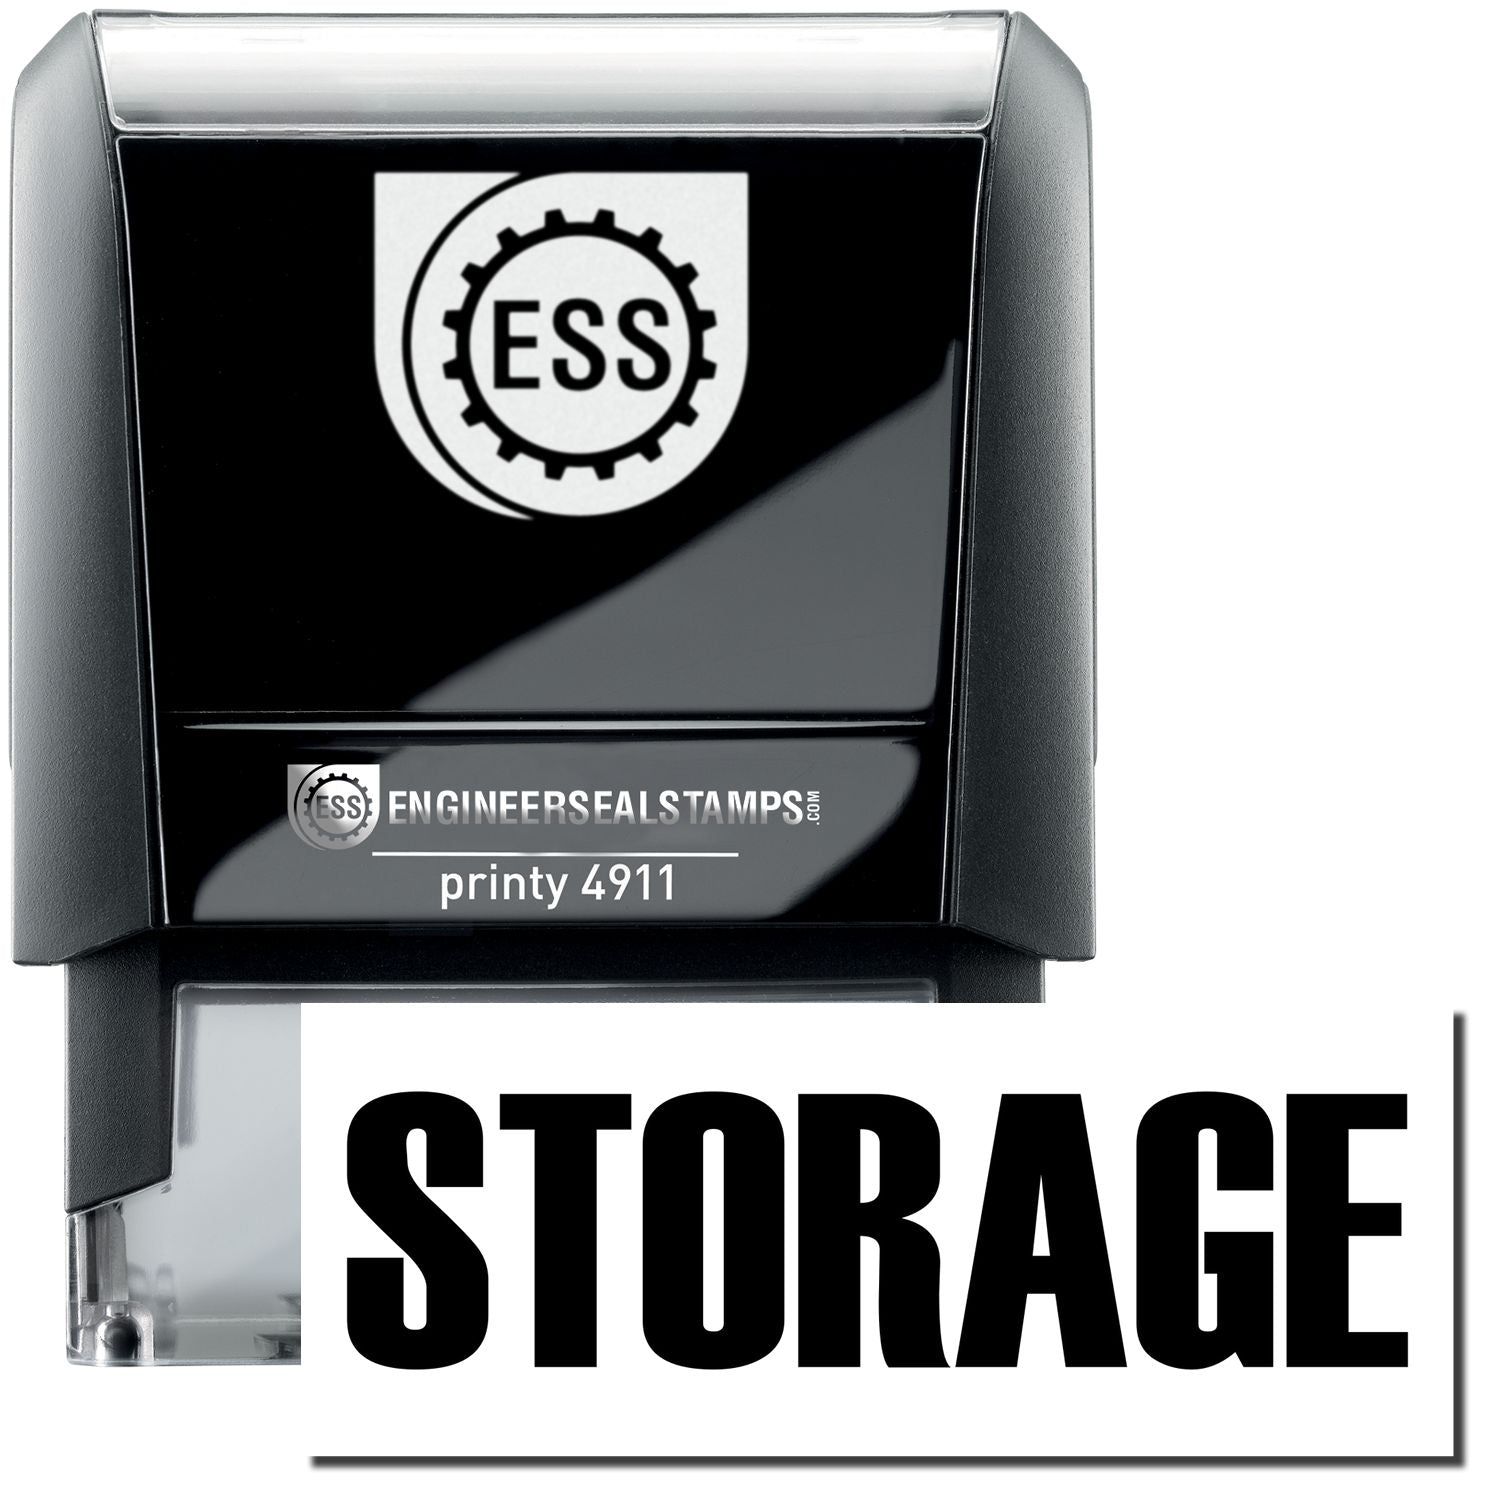 A self-inking stamp with a stamped image showing how the text "STORAGE" is displayed after stamping.